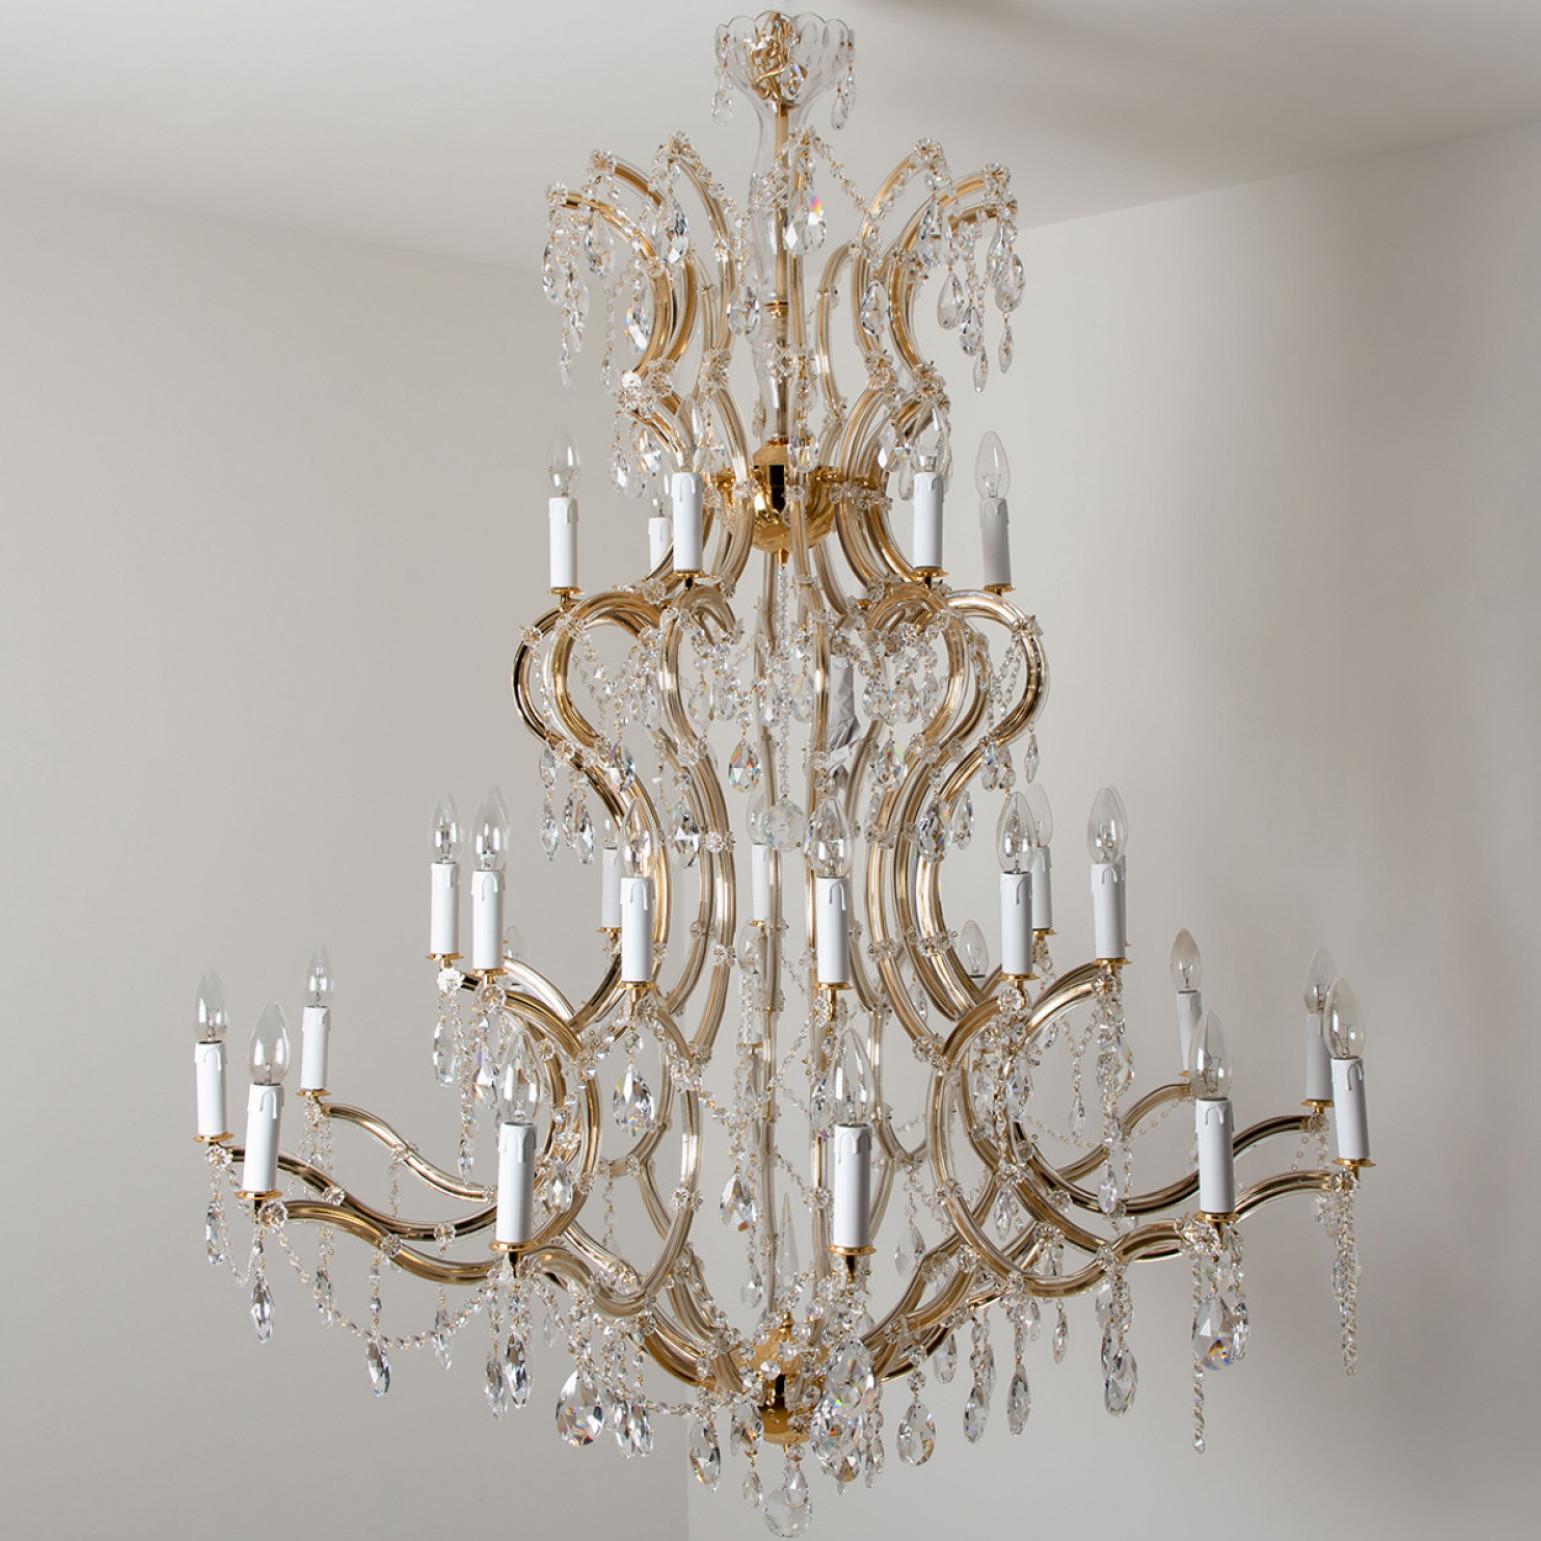 This stunning large high-end chandelier. Bring the passion of the Palace of Versailles into your home with this ageless classic. The Maria Theresa has been the gold standard for elegance and grace in the chandelier world for hundreds of years. This